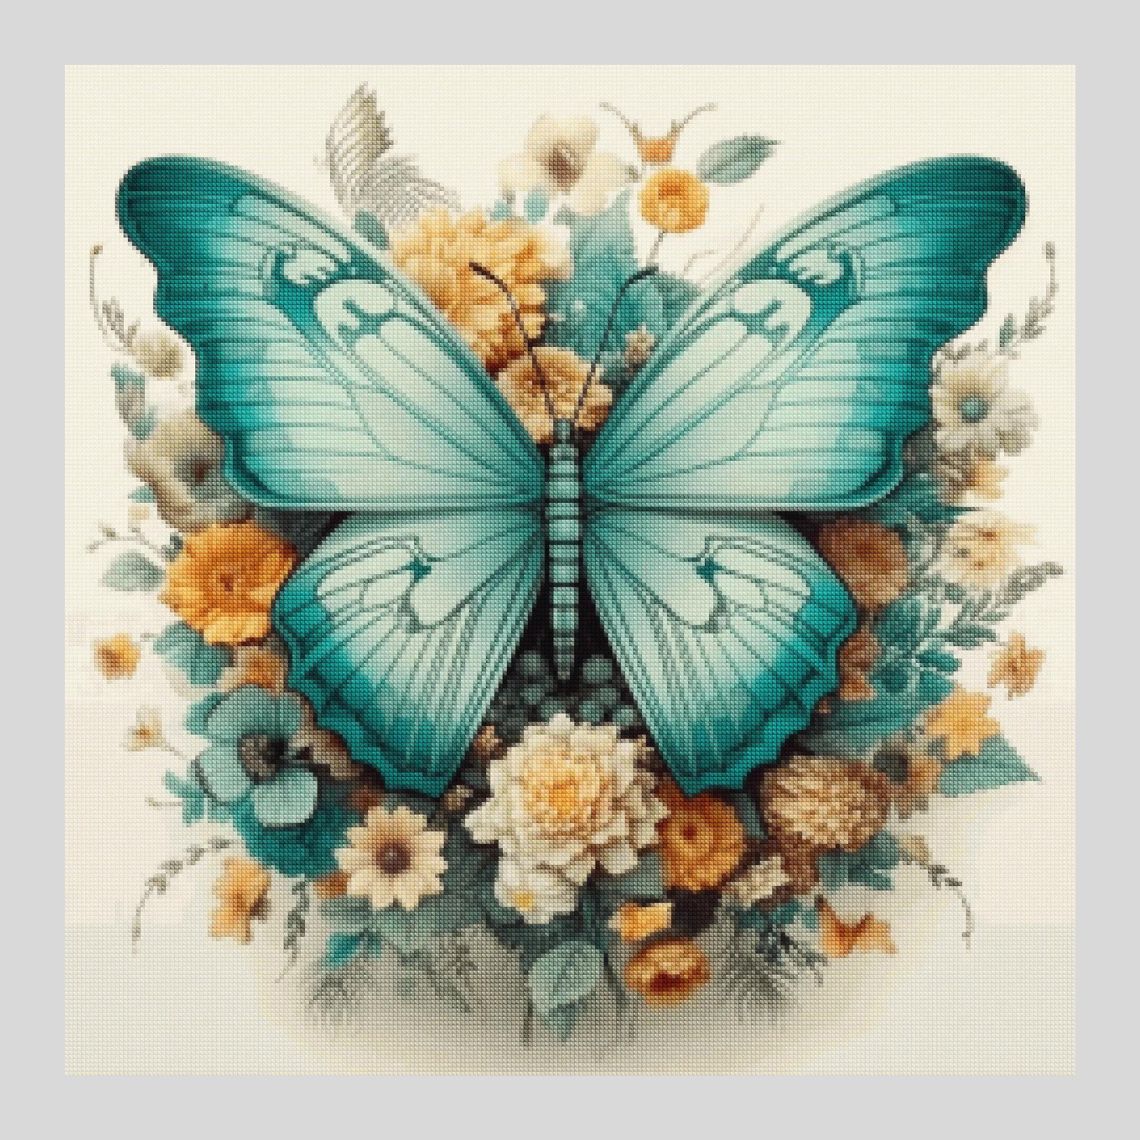 Turquoise Butterfly - Diamond Painting Kit